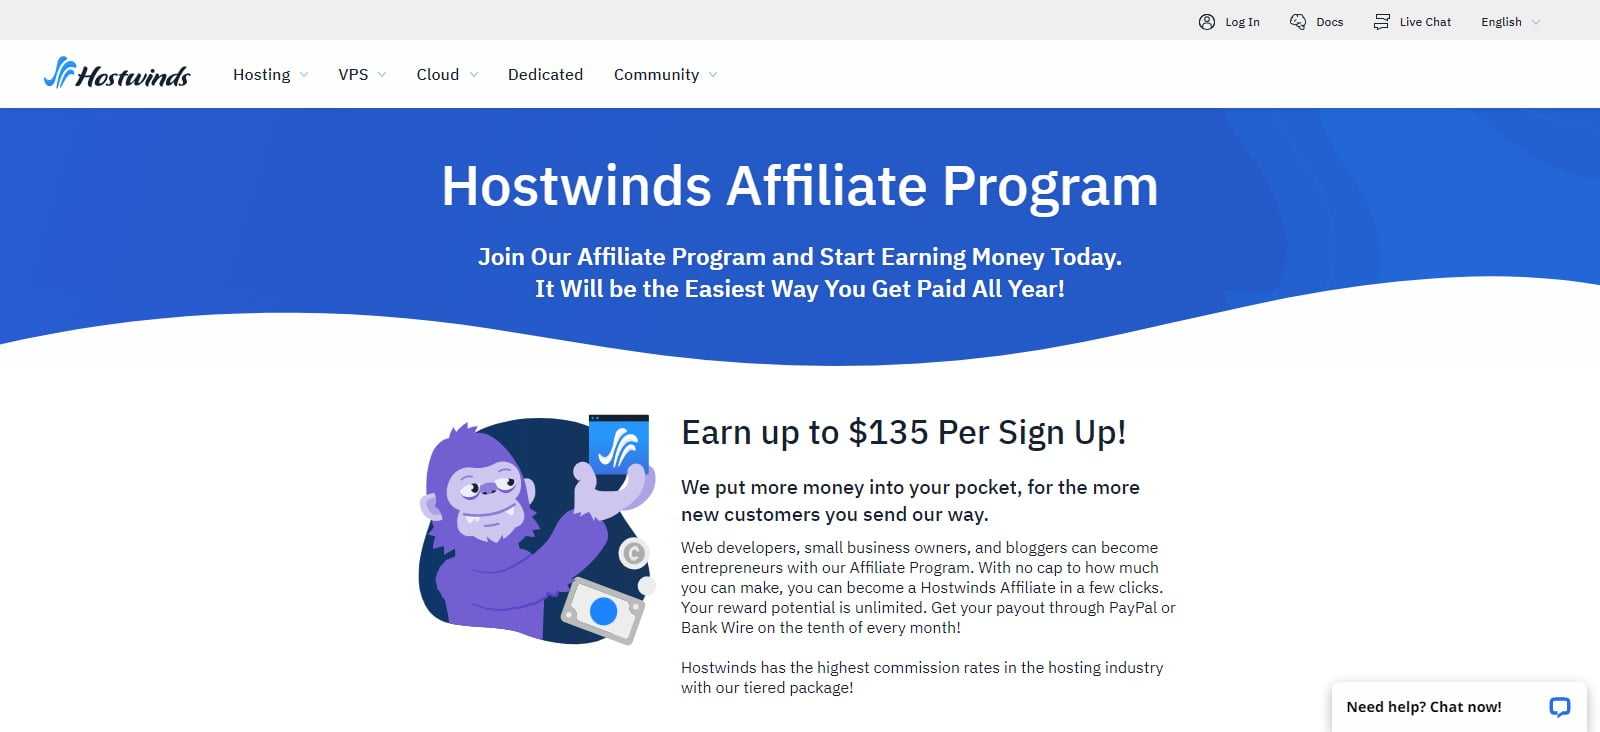 Hostwinds Affiliates Program Review: Earn Up To $65 - $135 Per Sale